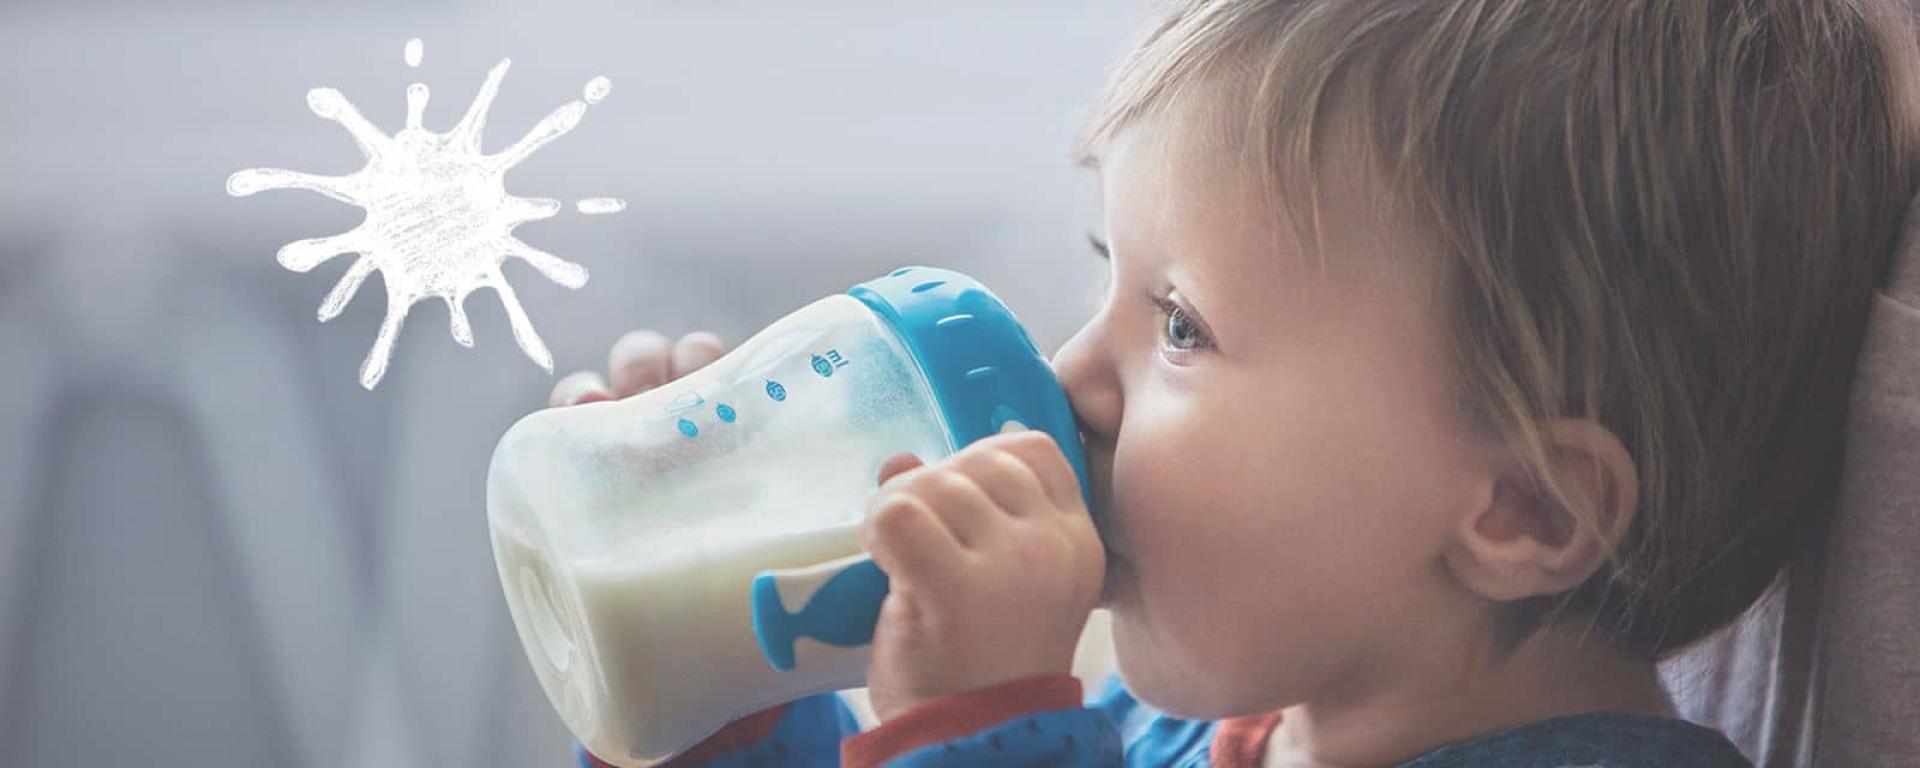 Child drinking follow on milk from a beaker with a blue top